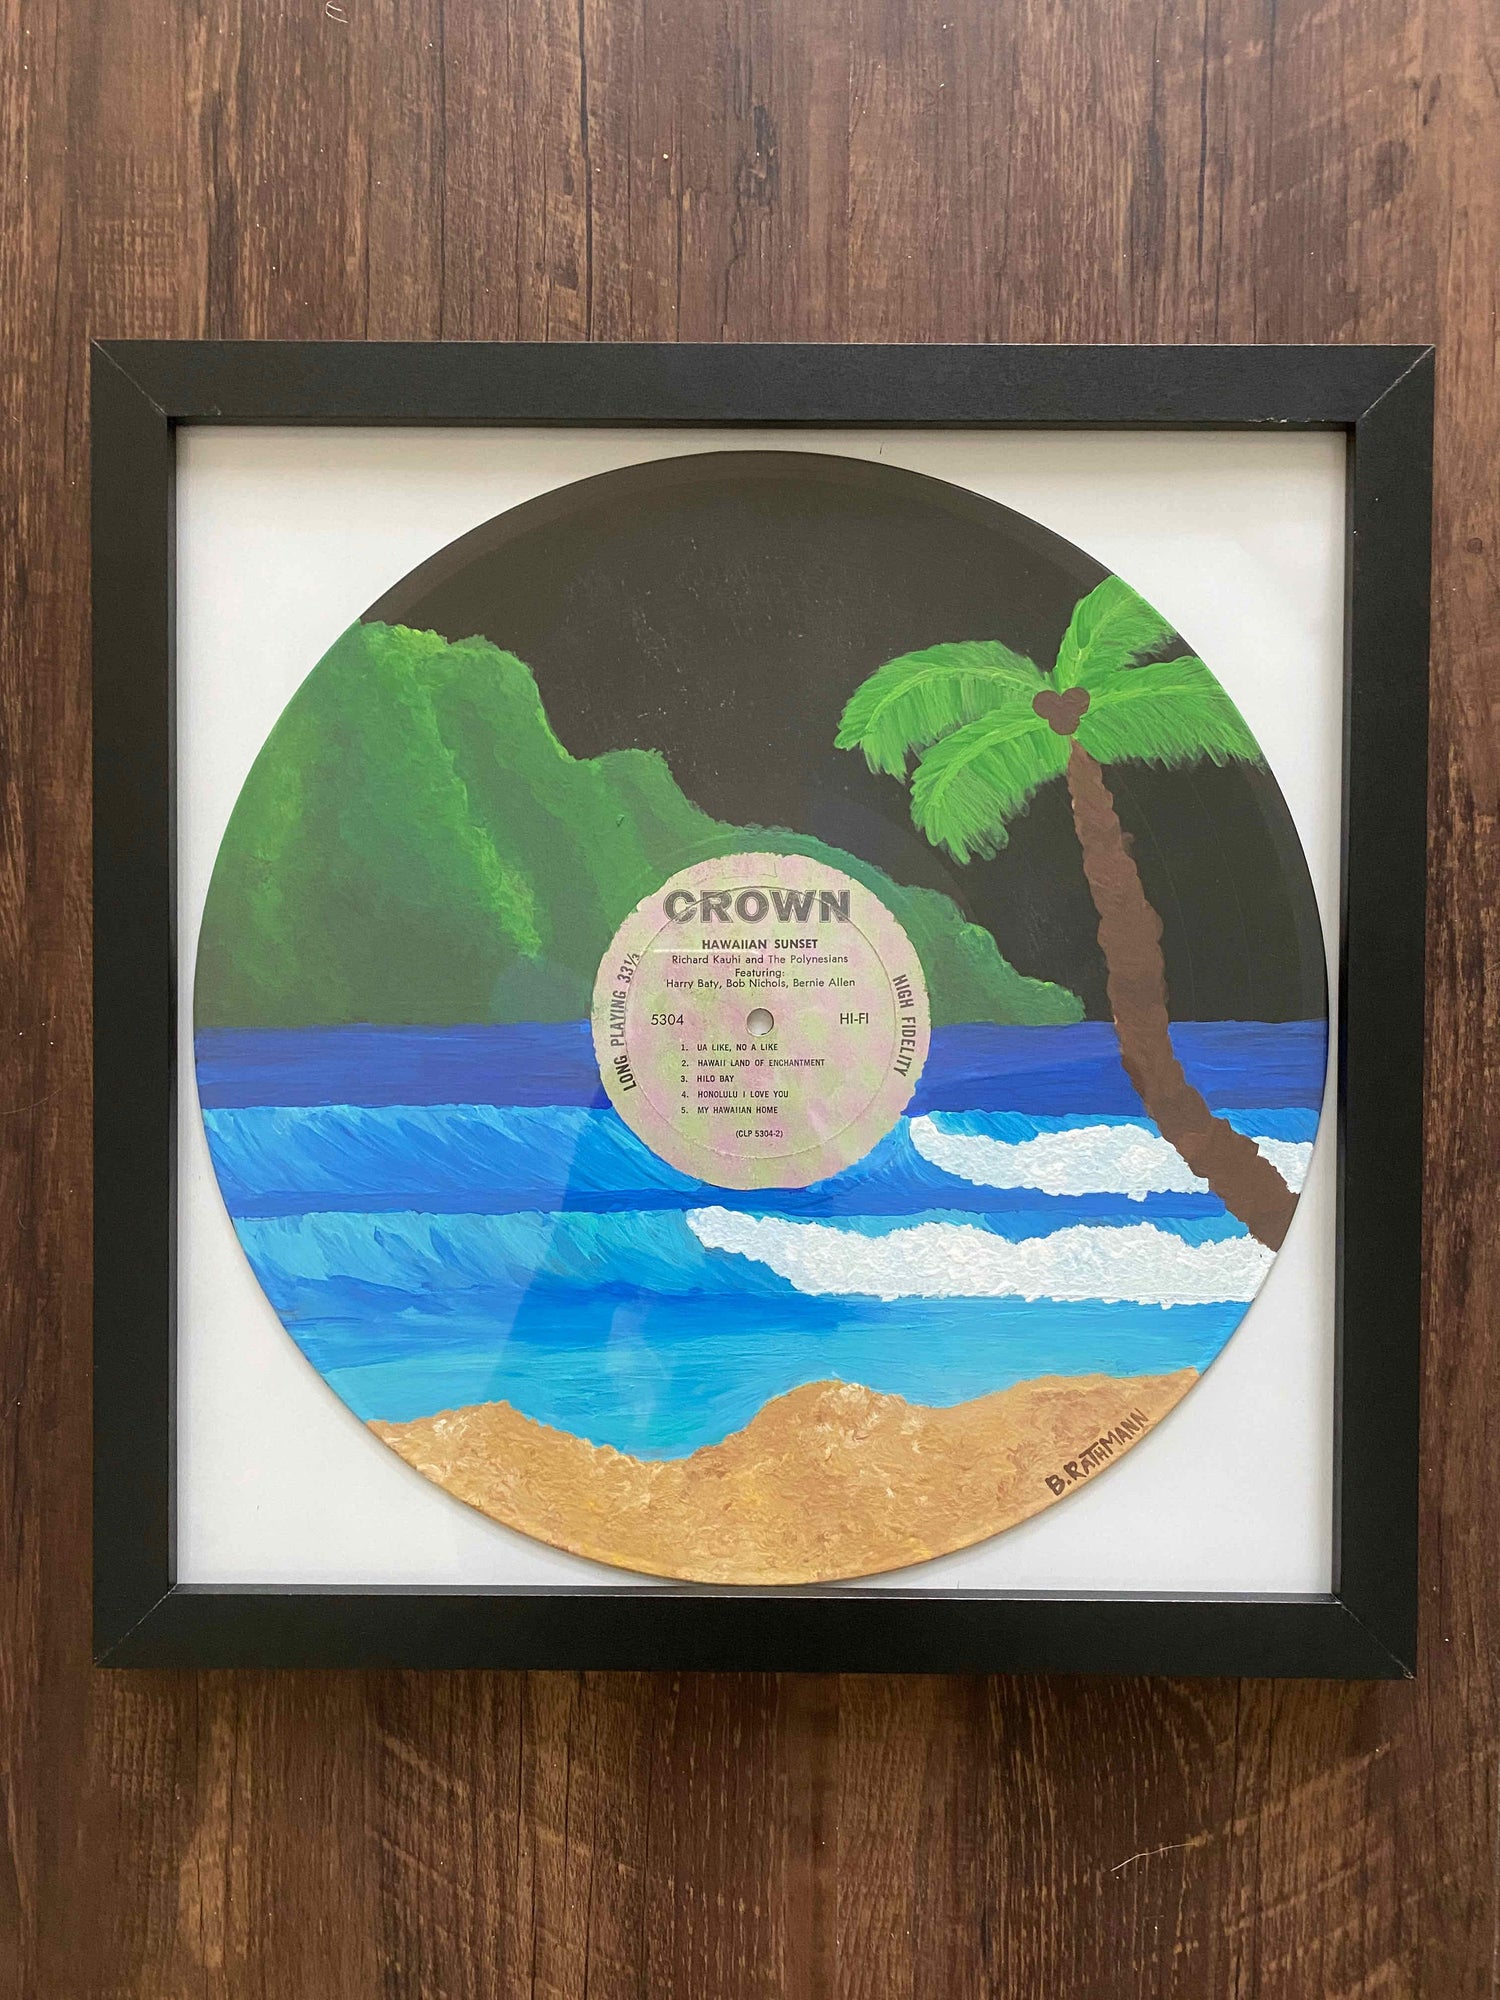 Hawaiian Sunset Record is an acrylic painting of a Hawaiian island on a thrifted record. This original painting is perfect for any space. This work was done on a repurposed vinyl record bought at a local thrift store.